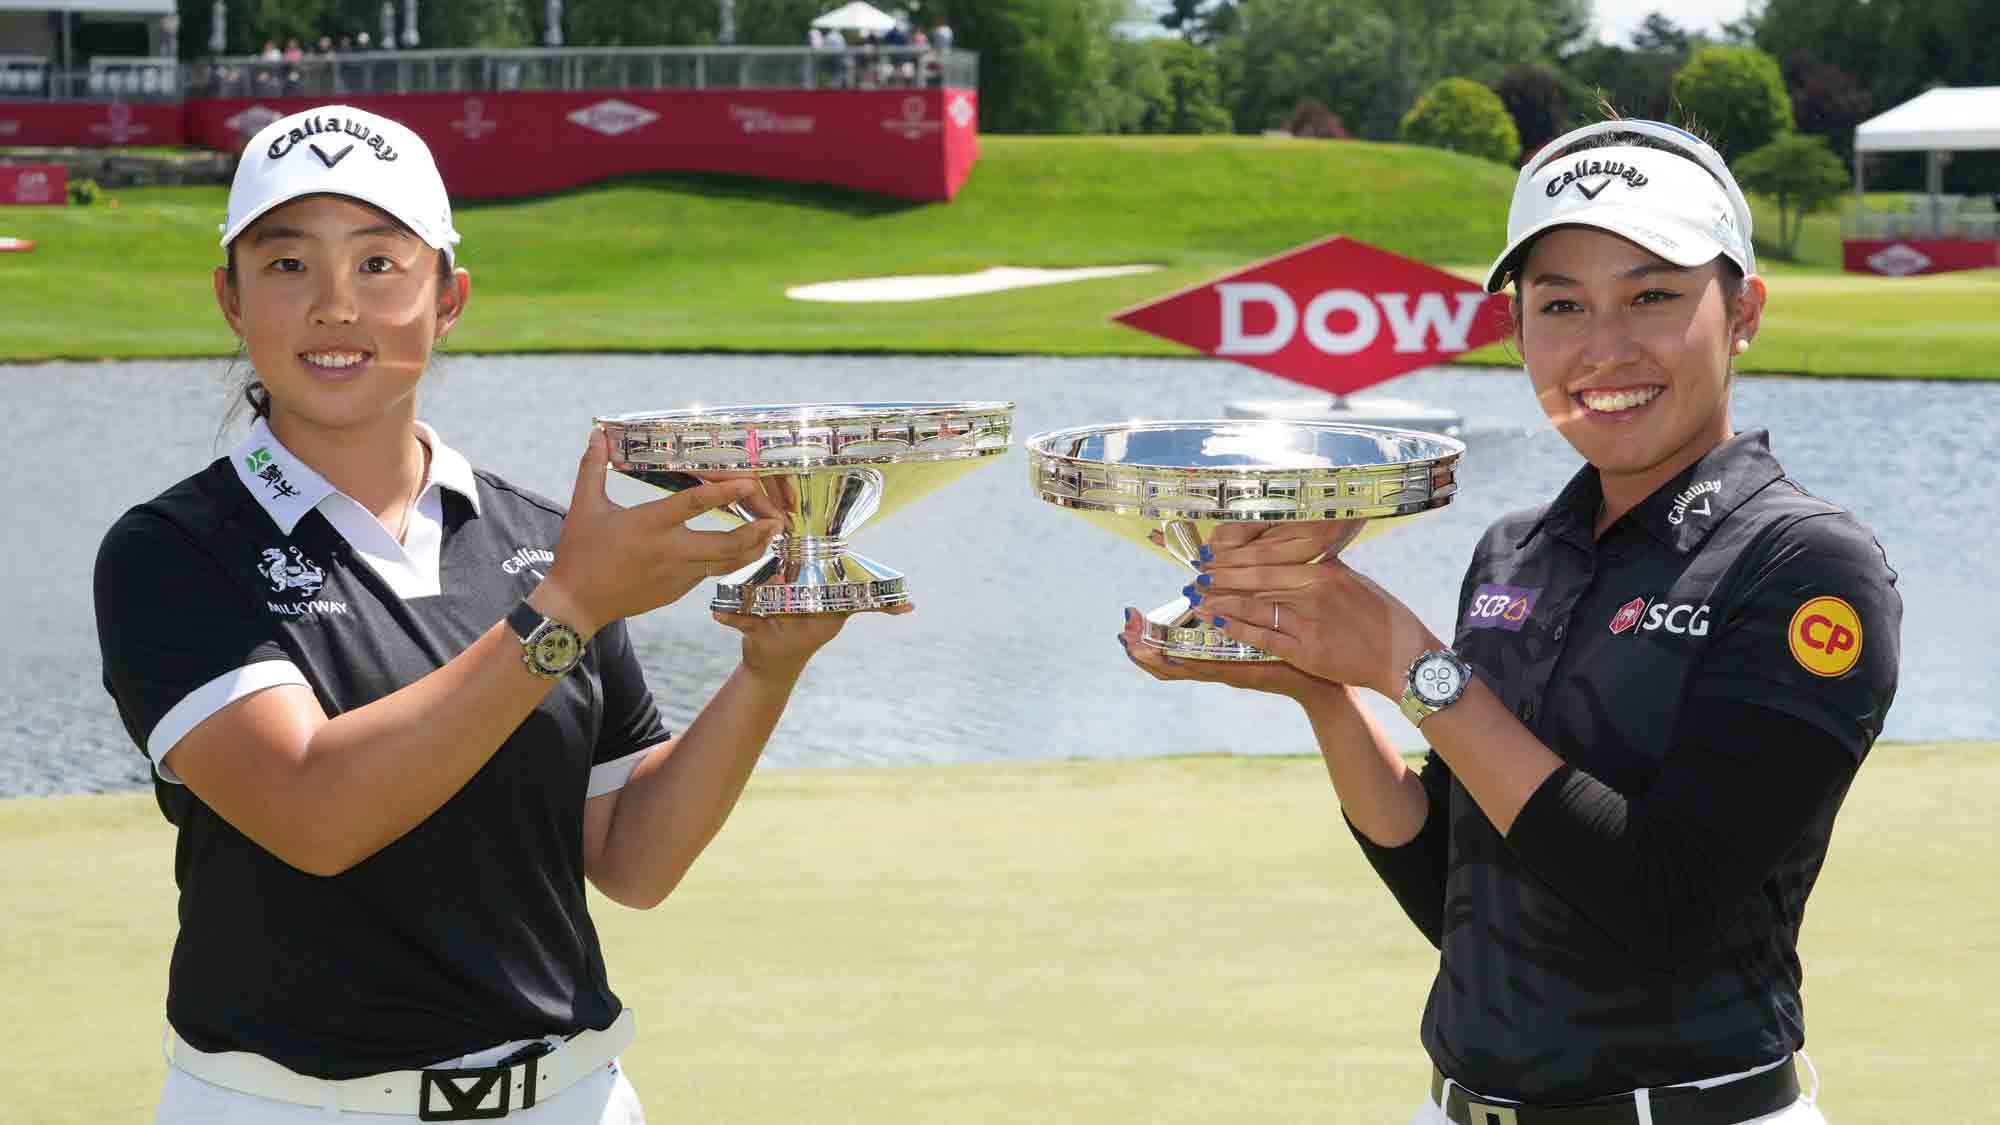 Ruoning Yin of China (L) and Atthaya Thitikul of Thailand pose with the trophy after winning the Dow Championship at Midland Country Club on June 30, 2024 in Midland, Michigan.